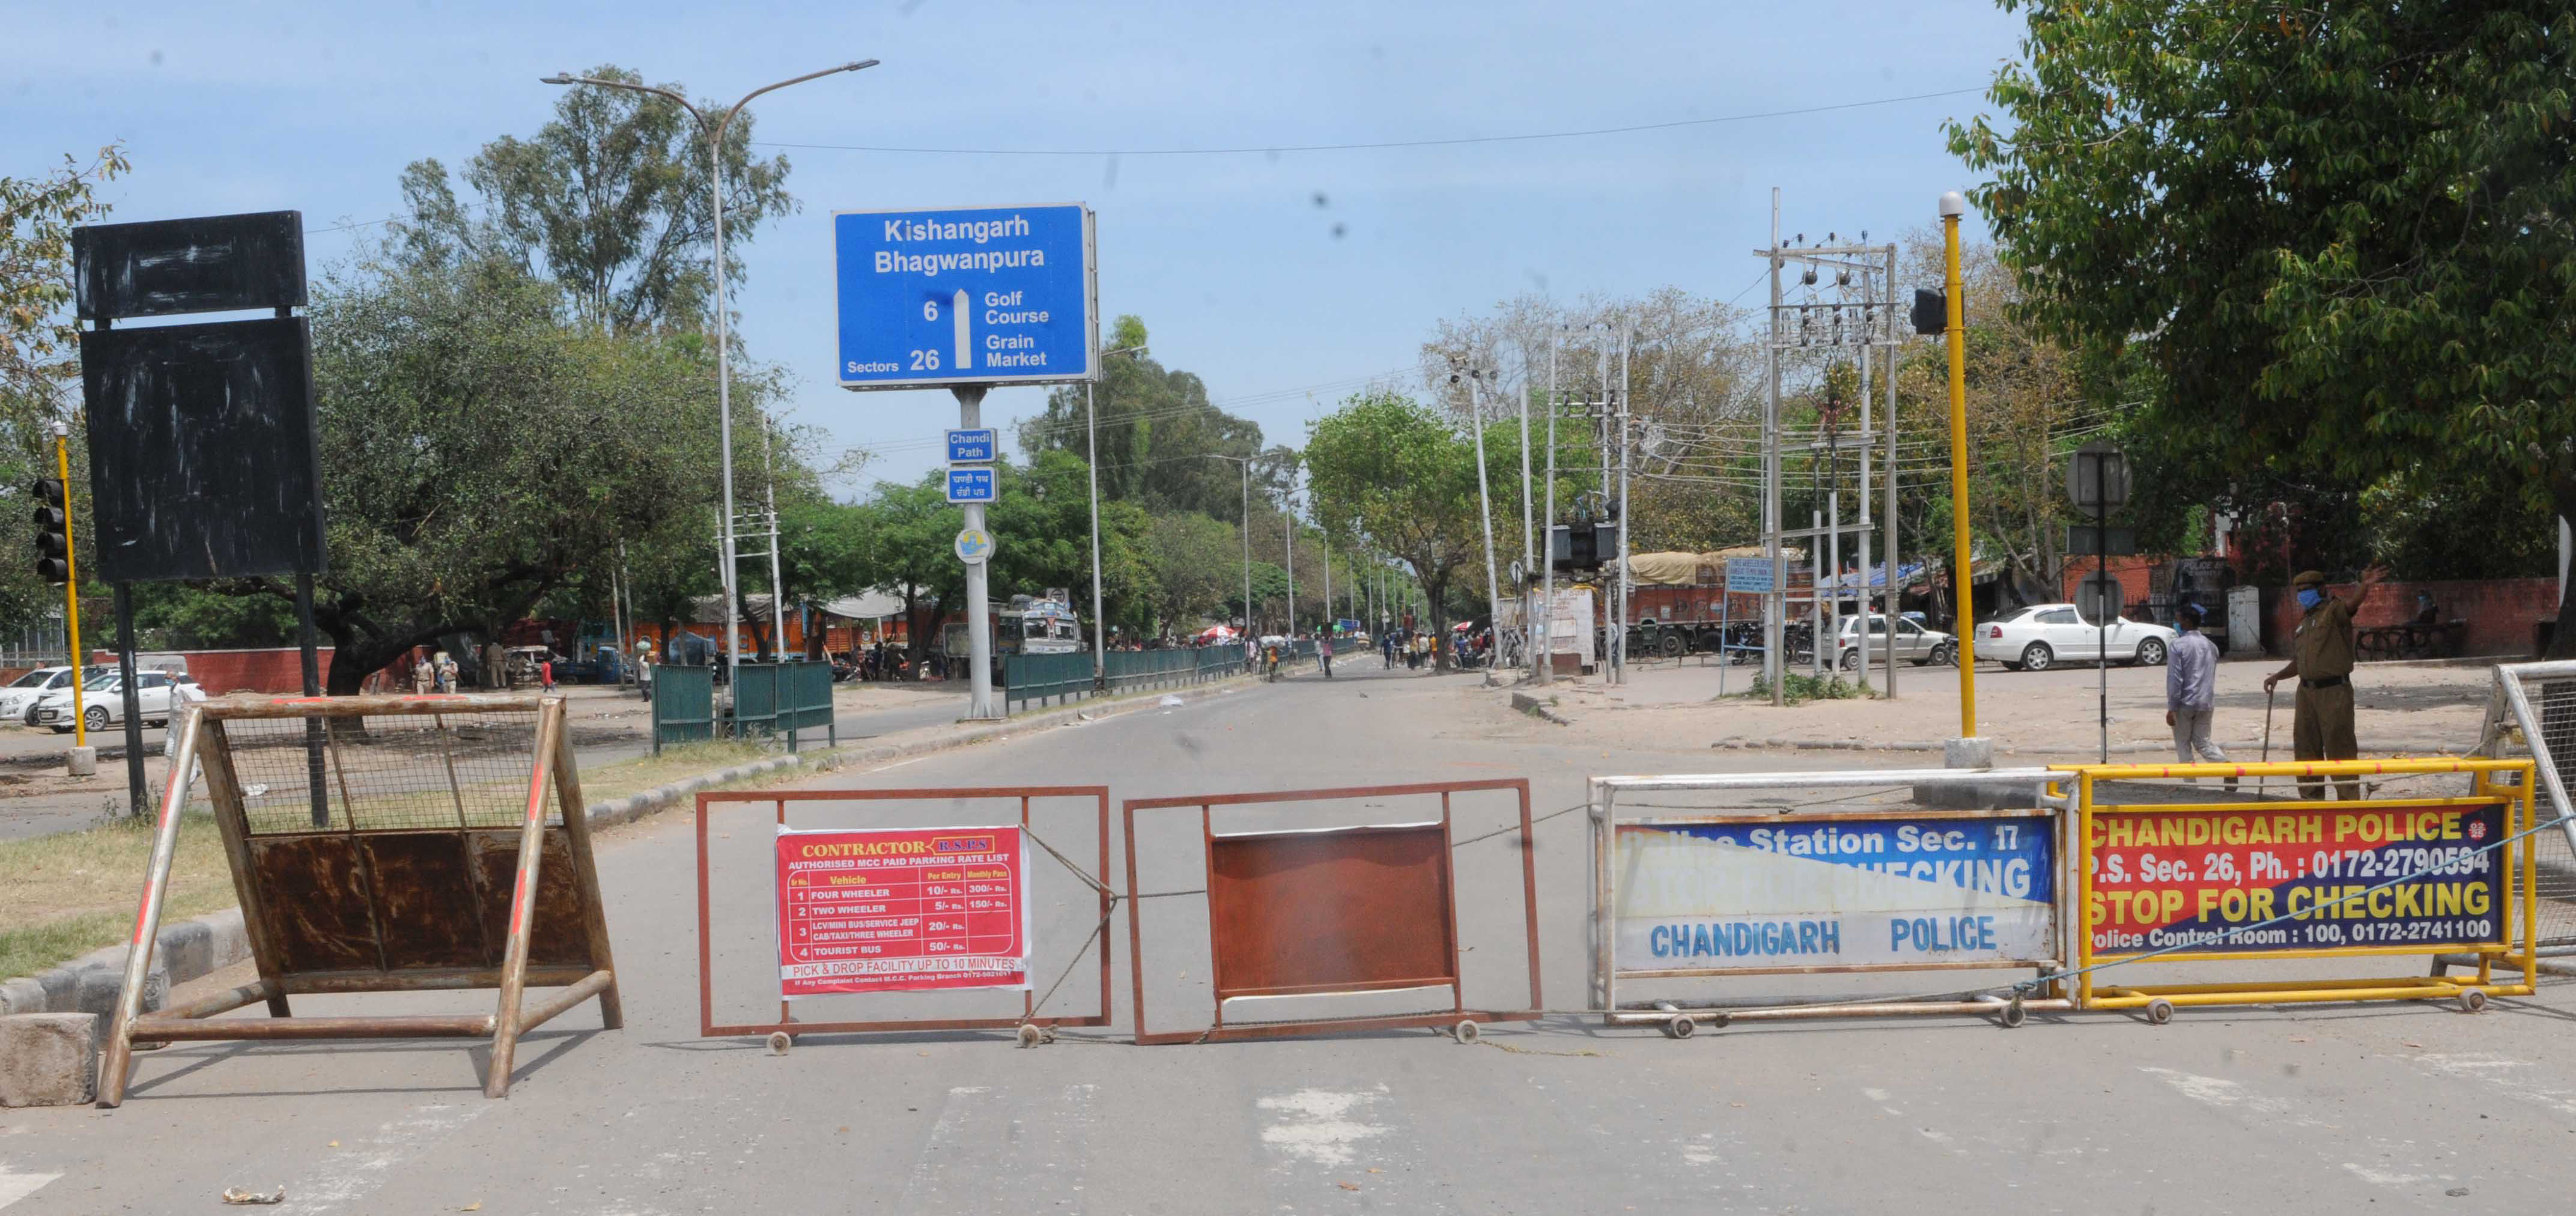 Barricades are seen in Chandigarh, India, during a nationwide lockdown to prevent the spread of the novel coronavirus on April 12.